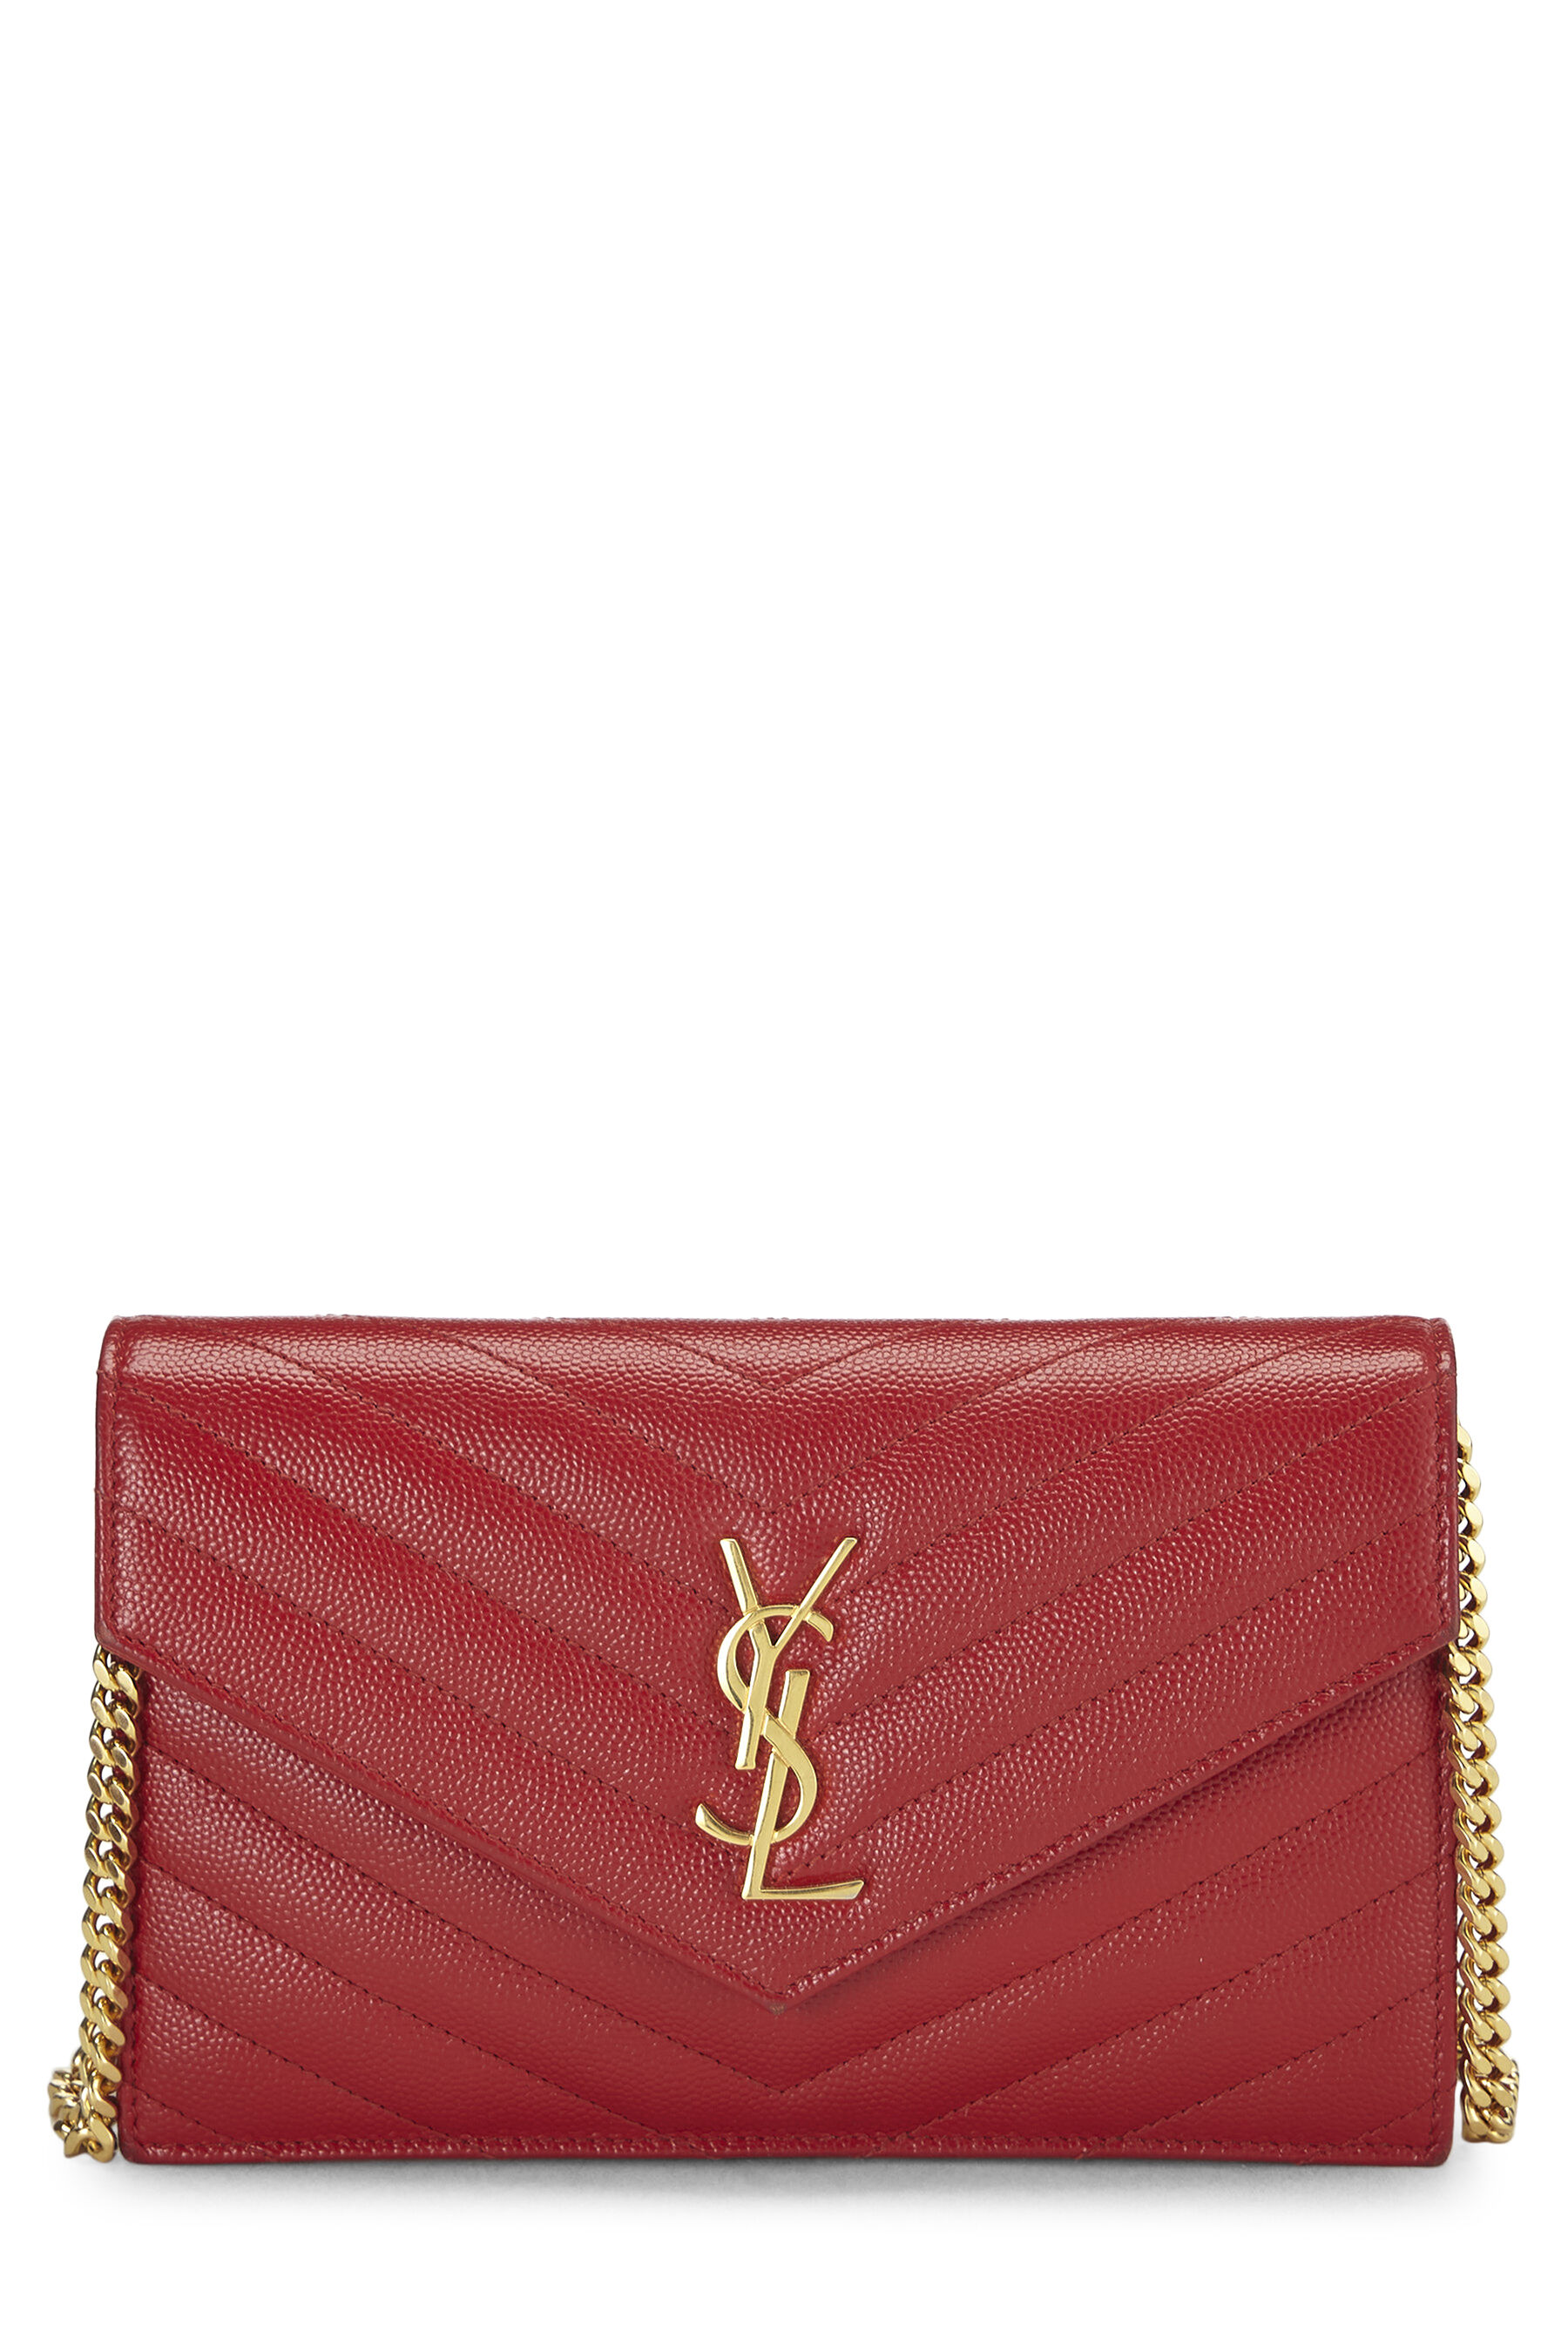 YSL Red Grained Calfskin Envelope Wallet-On-Chain (WOC)